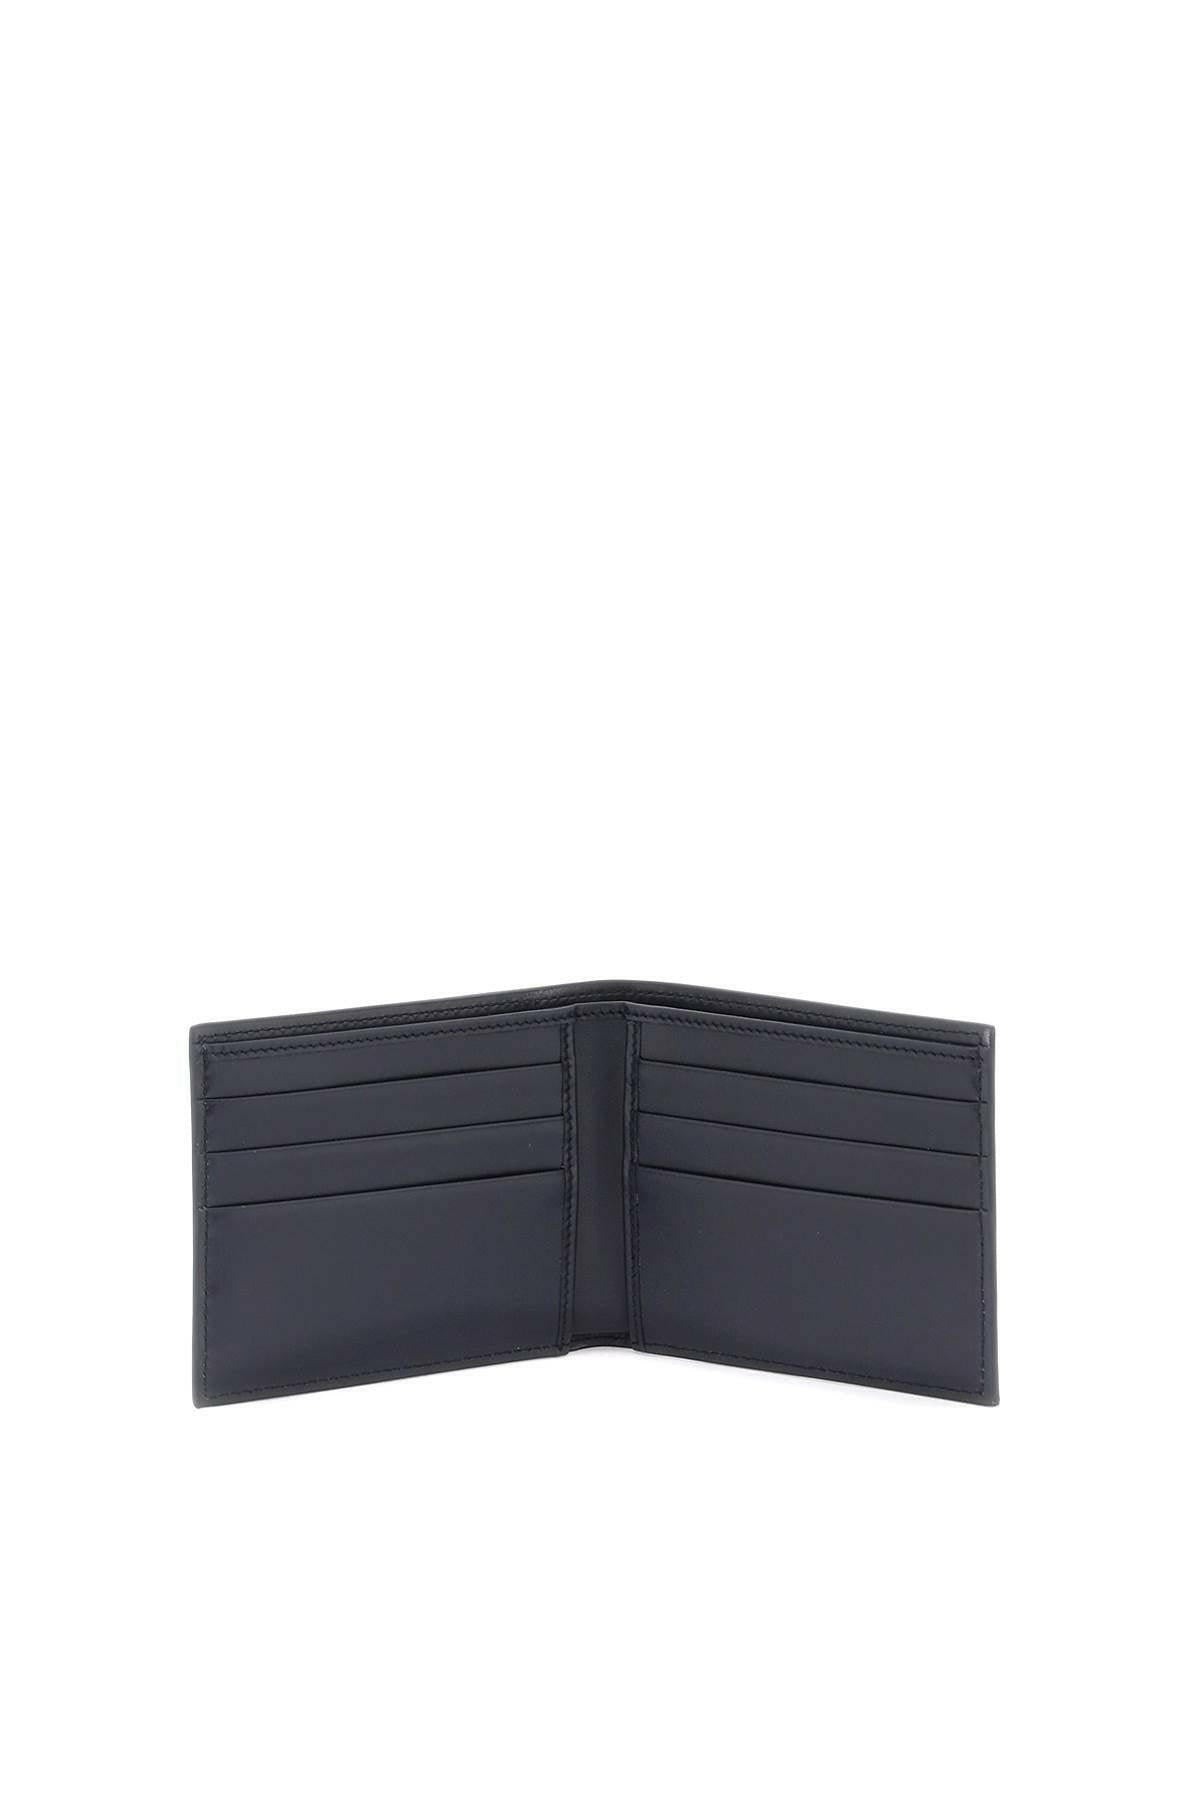 Dolce & Gabbana Wallet With Logo